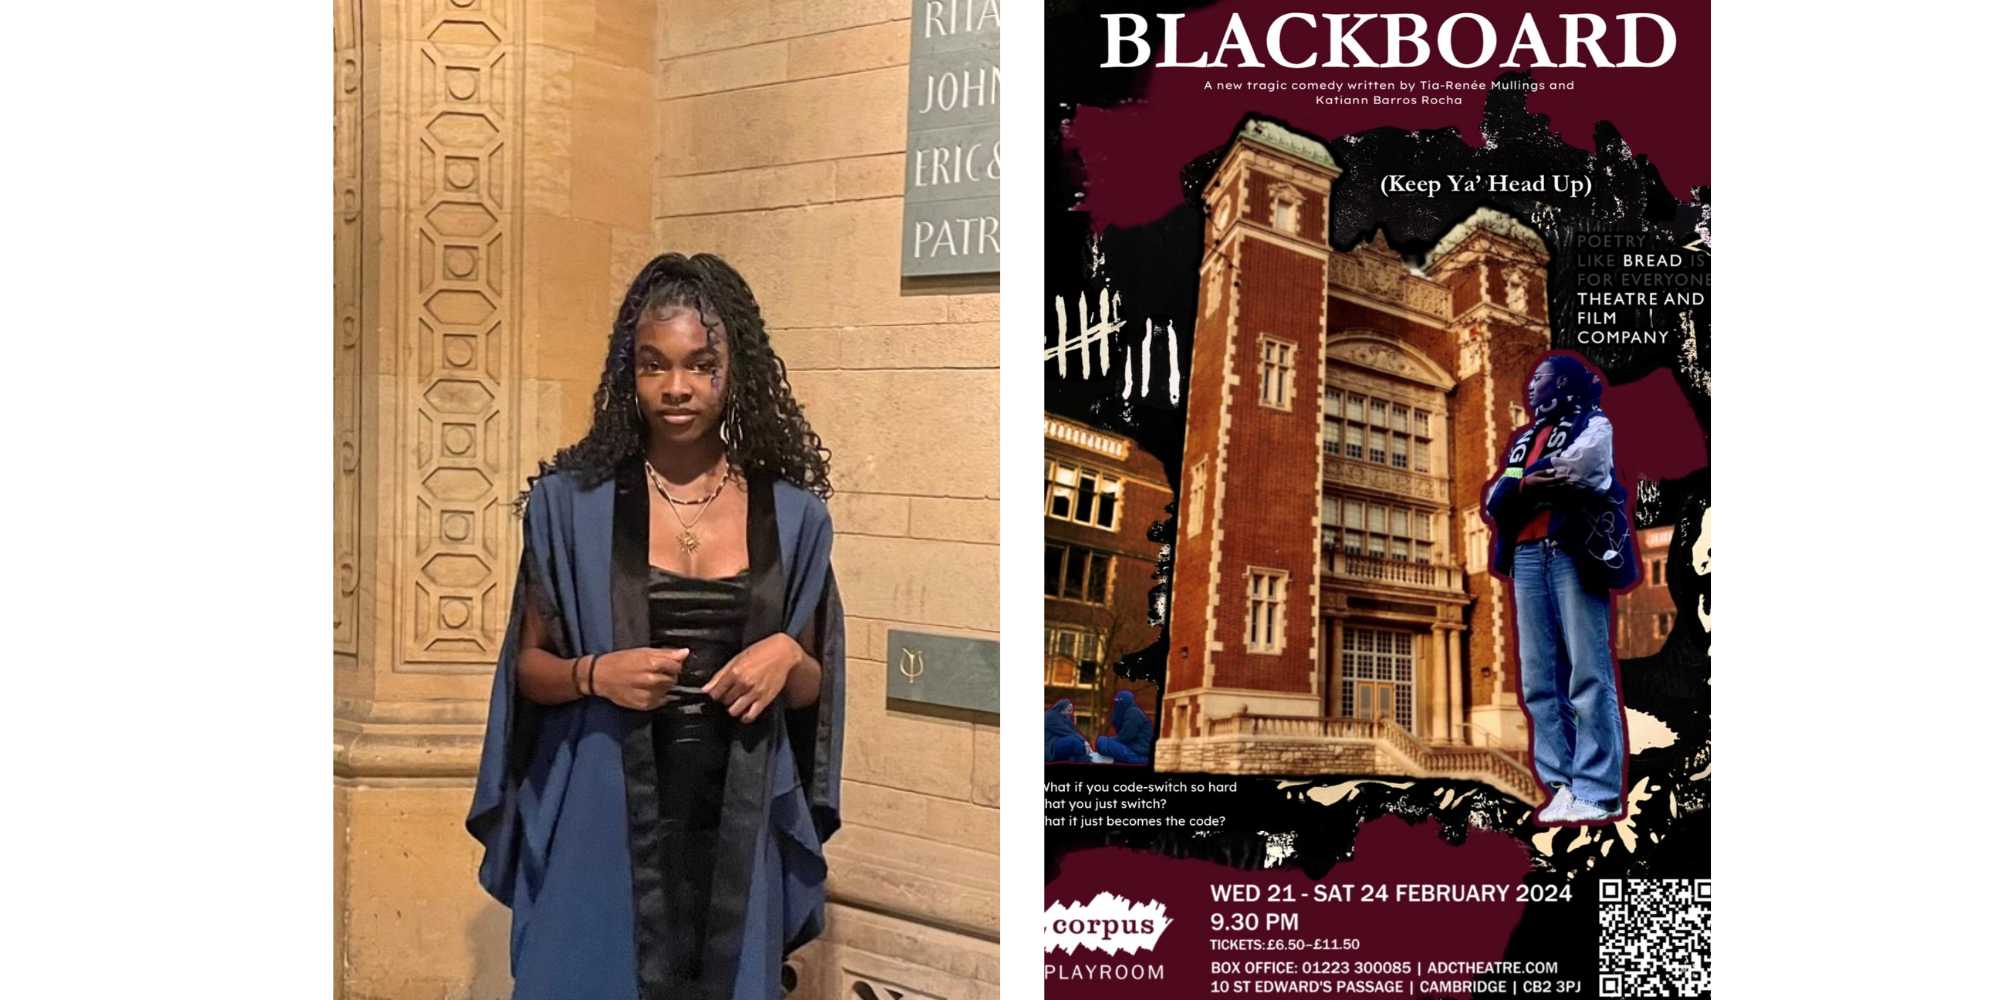 A collage of a woman in a blue academic gown and an advert for a play called Blackboard